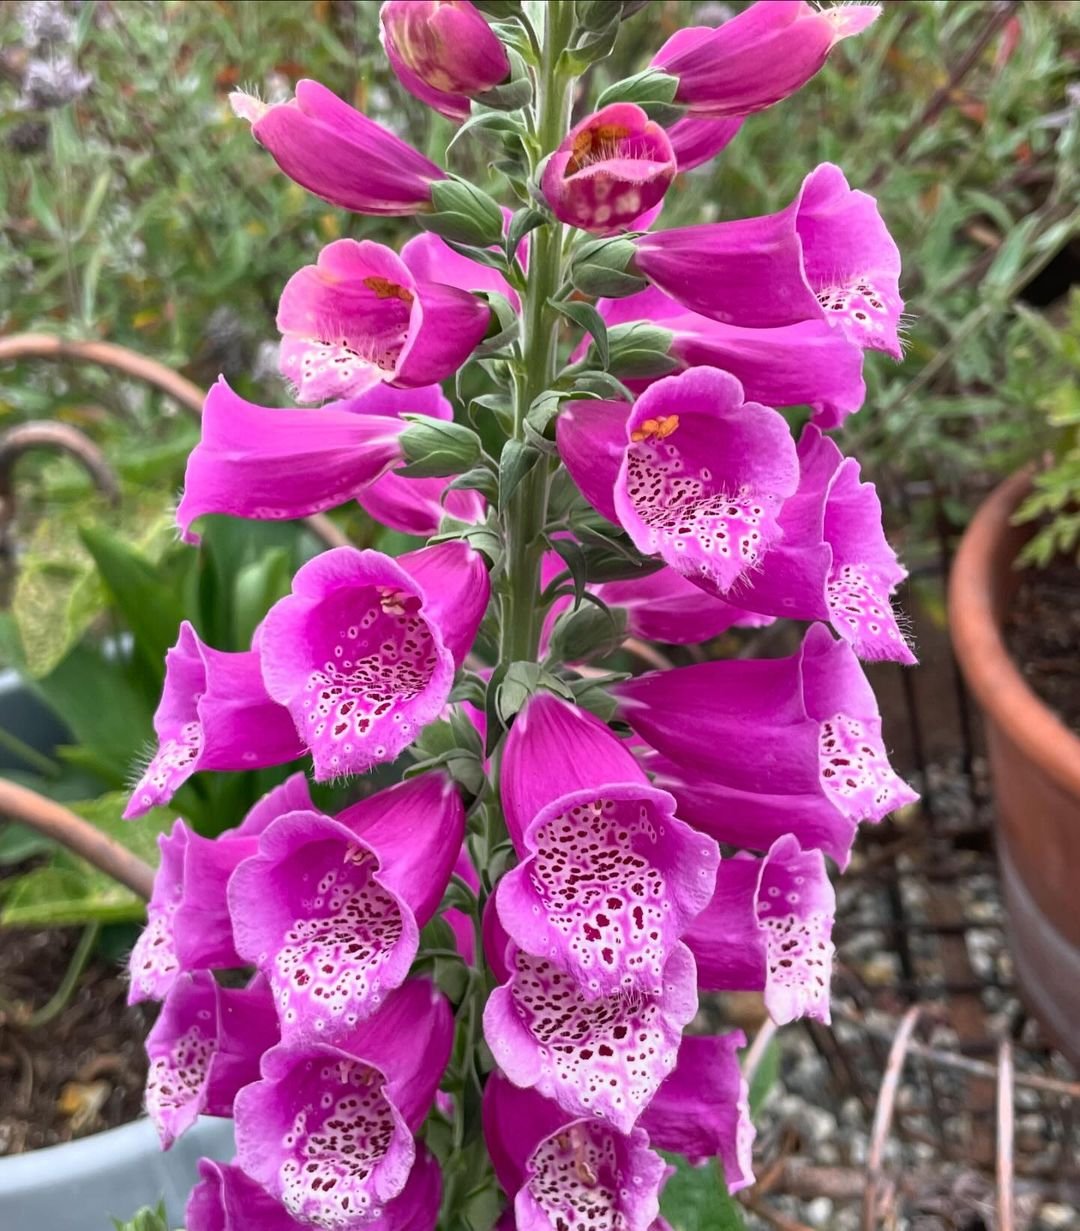 Purple foxglove flowers with spotted throats, growing in a garden.